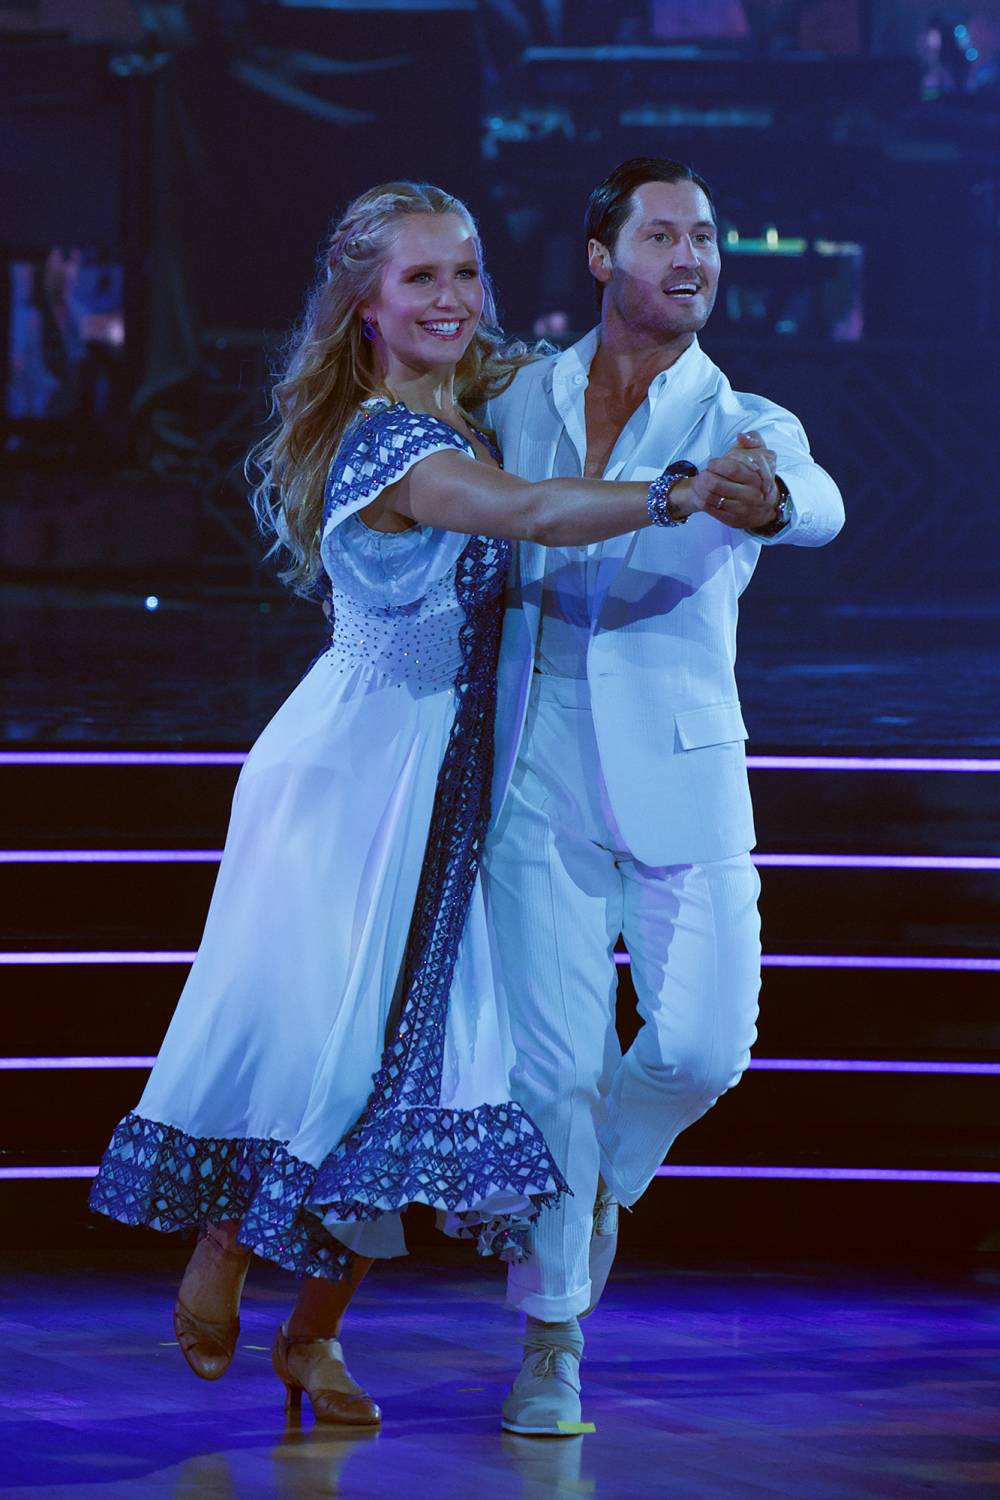 Sailor Brinkley-Cook and Val Chmerkovskiy 'Dancing with the Stars'